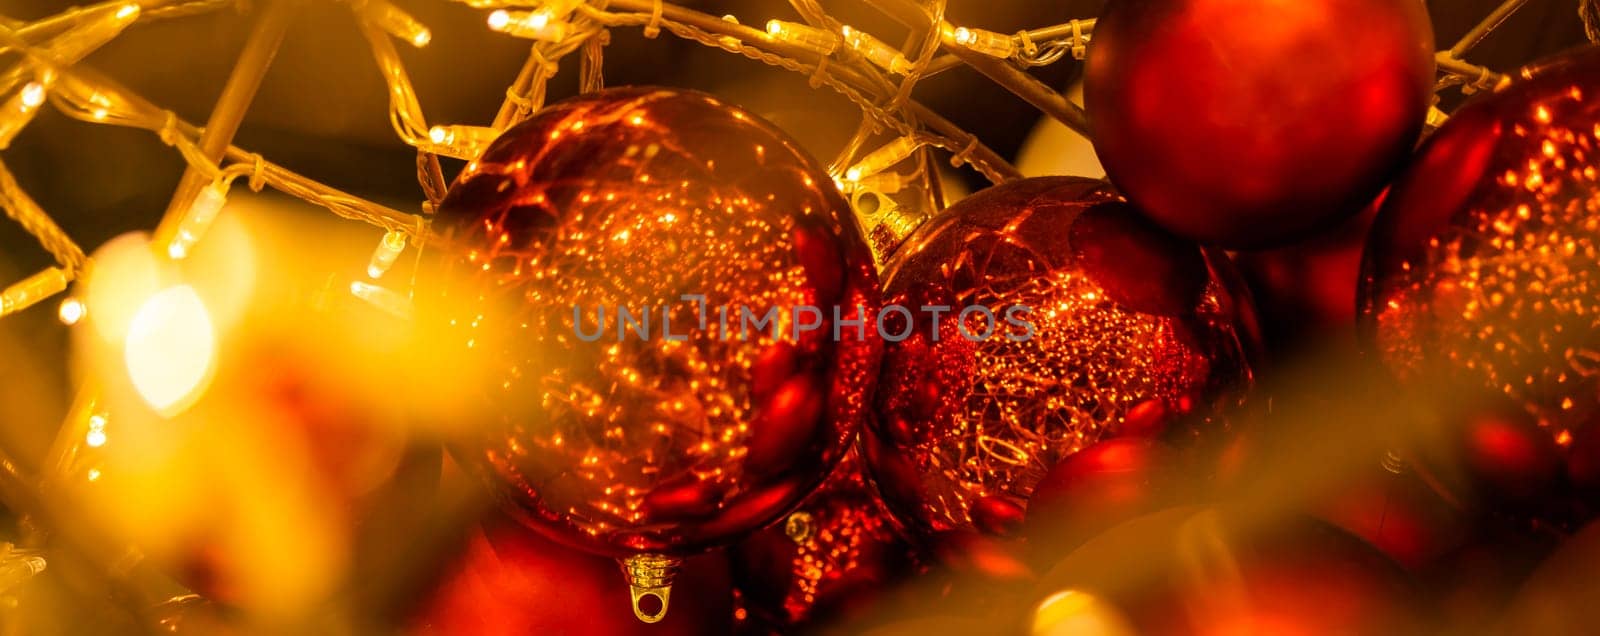 Banner red glowing Christmas balls garlands close-up. Holidays decoration and festive xmas concept copy space. Copy space and empty place for text, mock up greeting card by Satura86